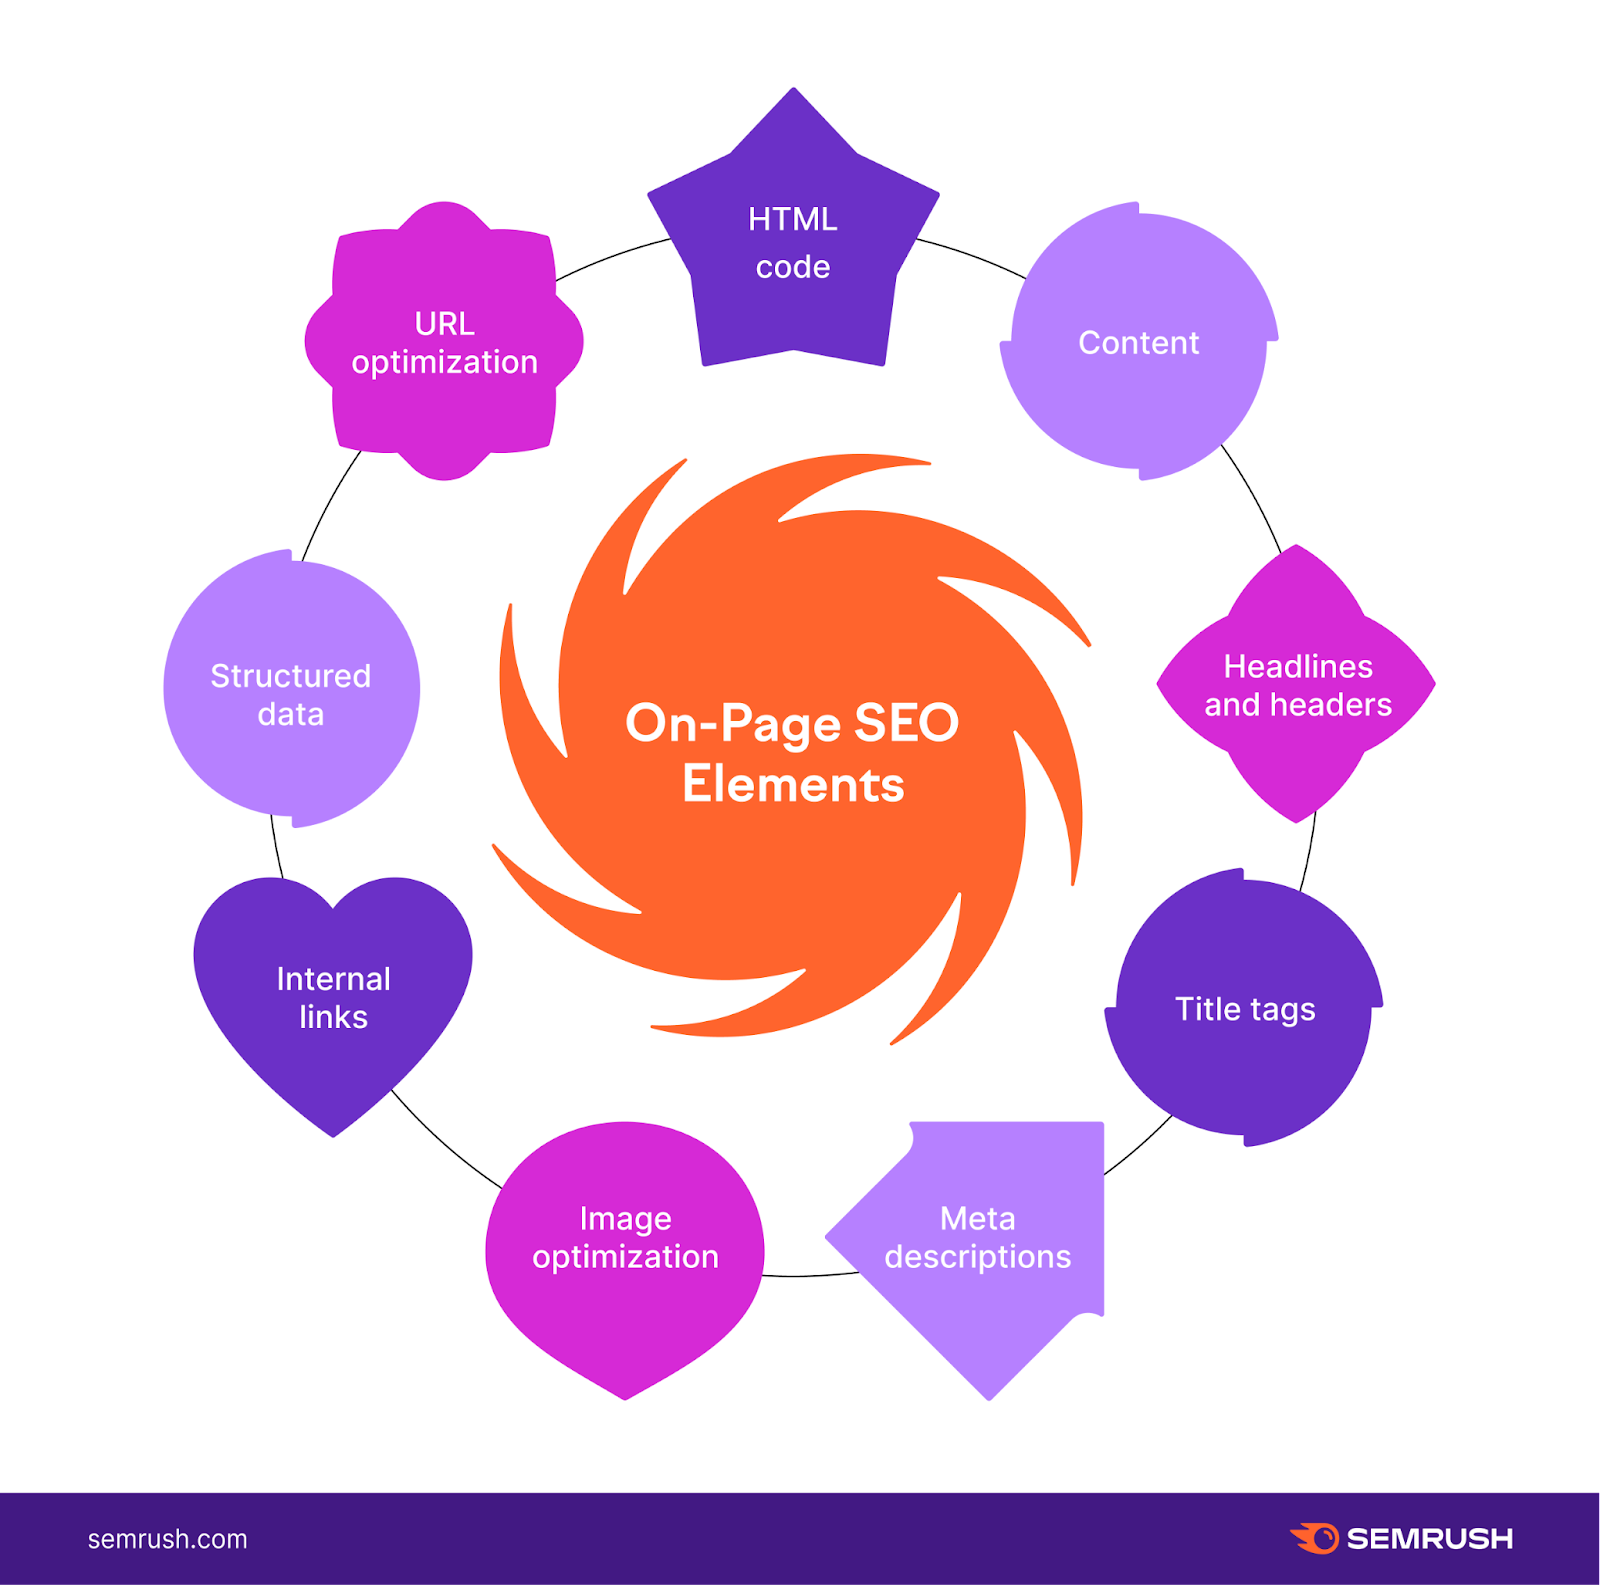 On-page SEO elements listed